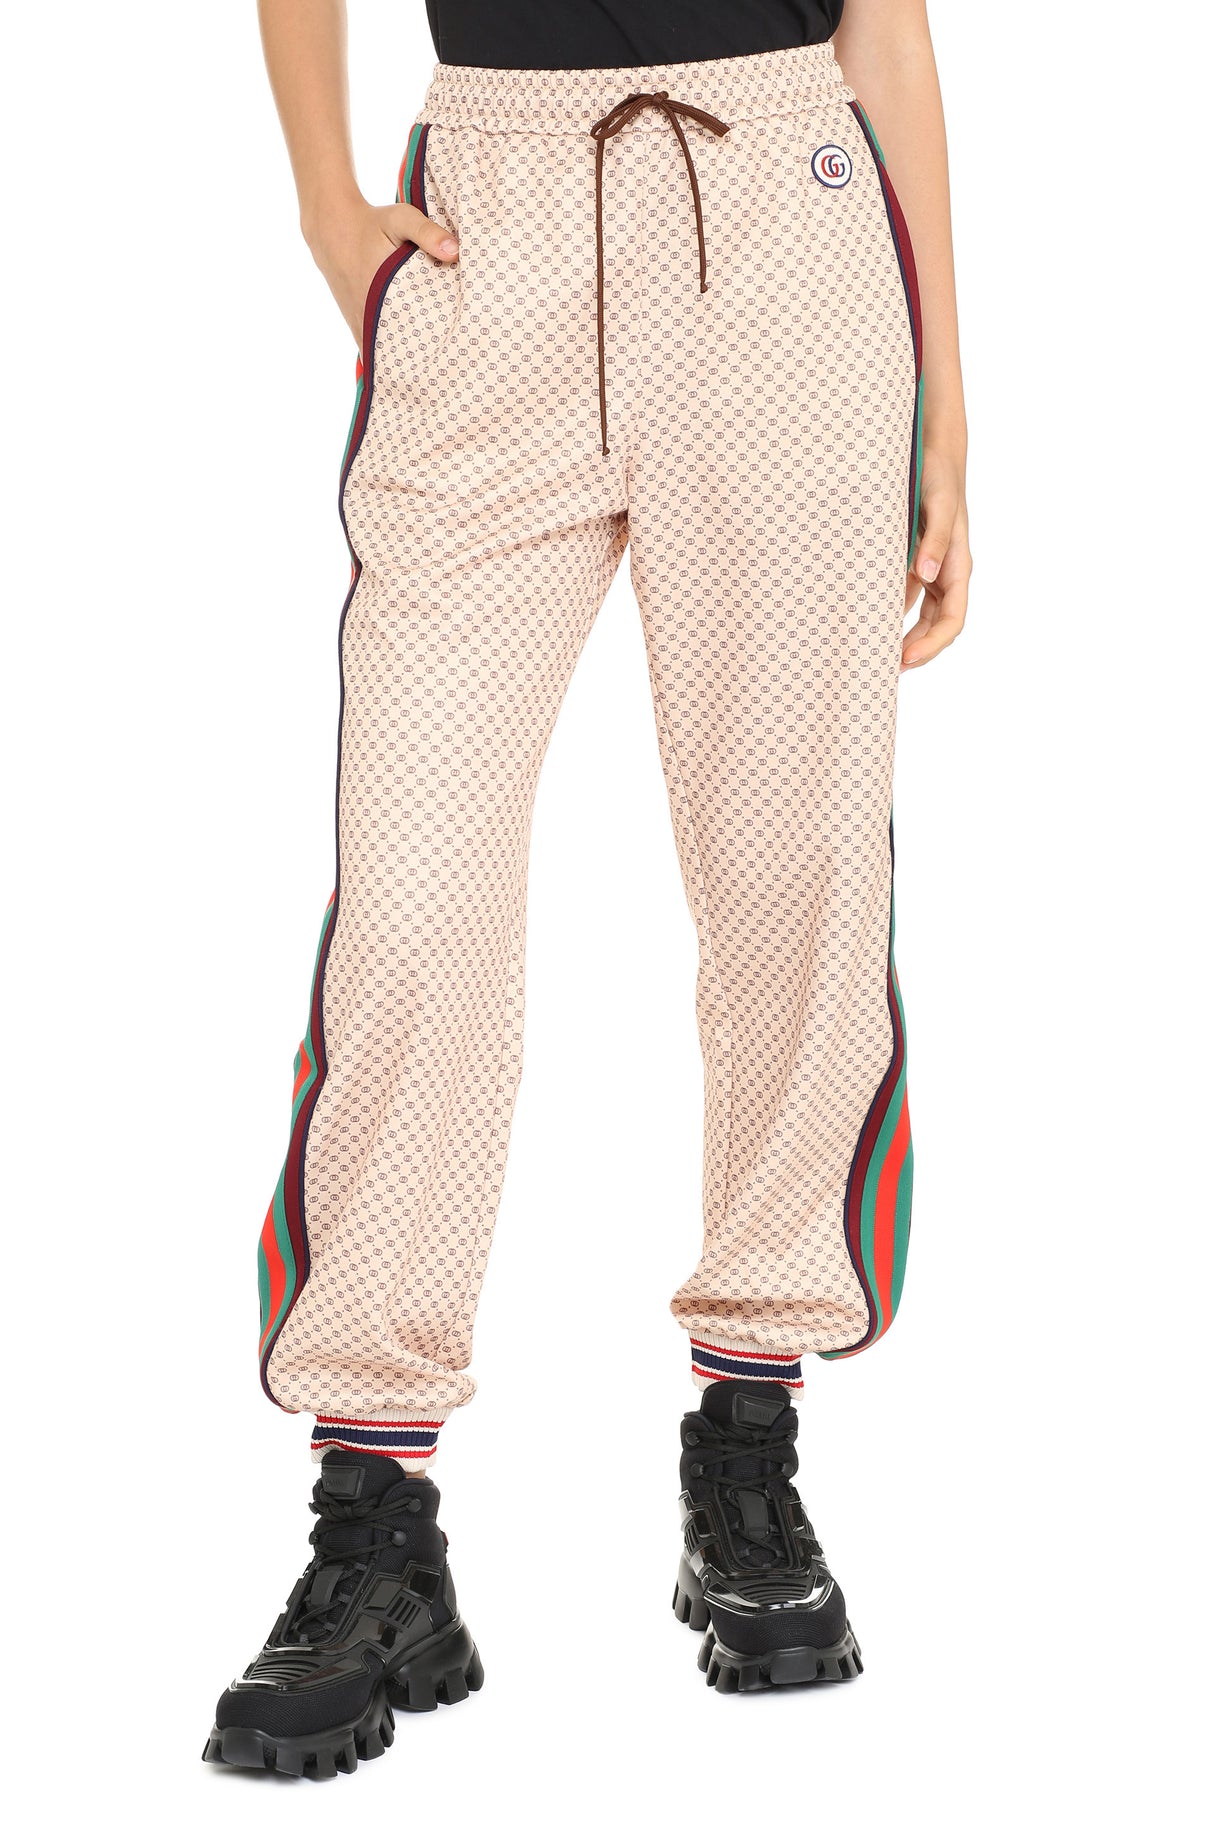 GUCCI Women's Contrast Stripe Track Pants with Beige Web Insert and Logo Patch